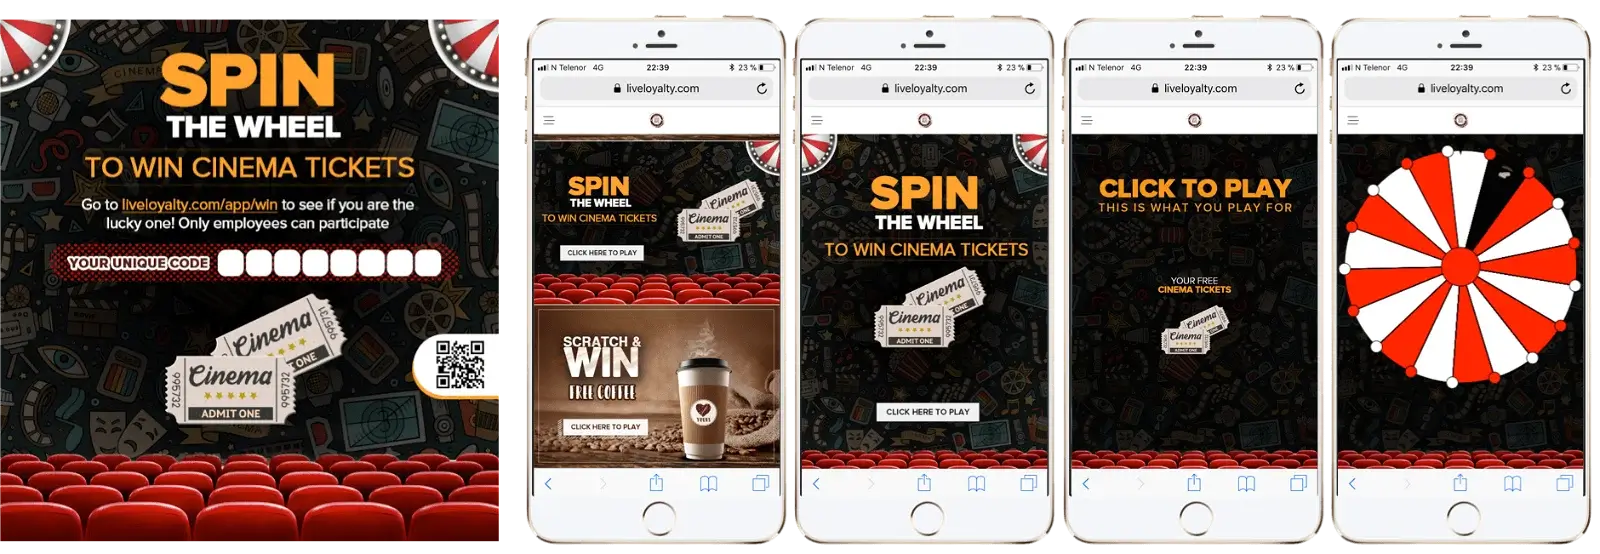 spin the wheel game to win cinema tickets 